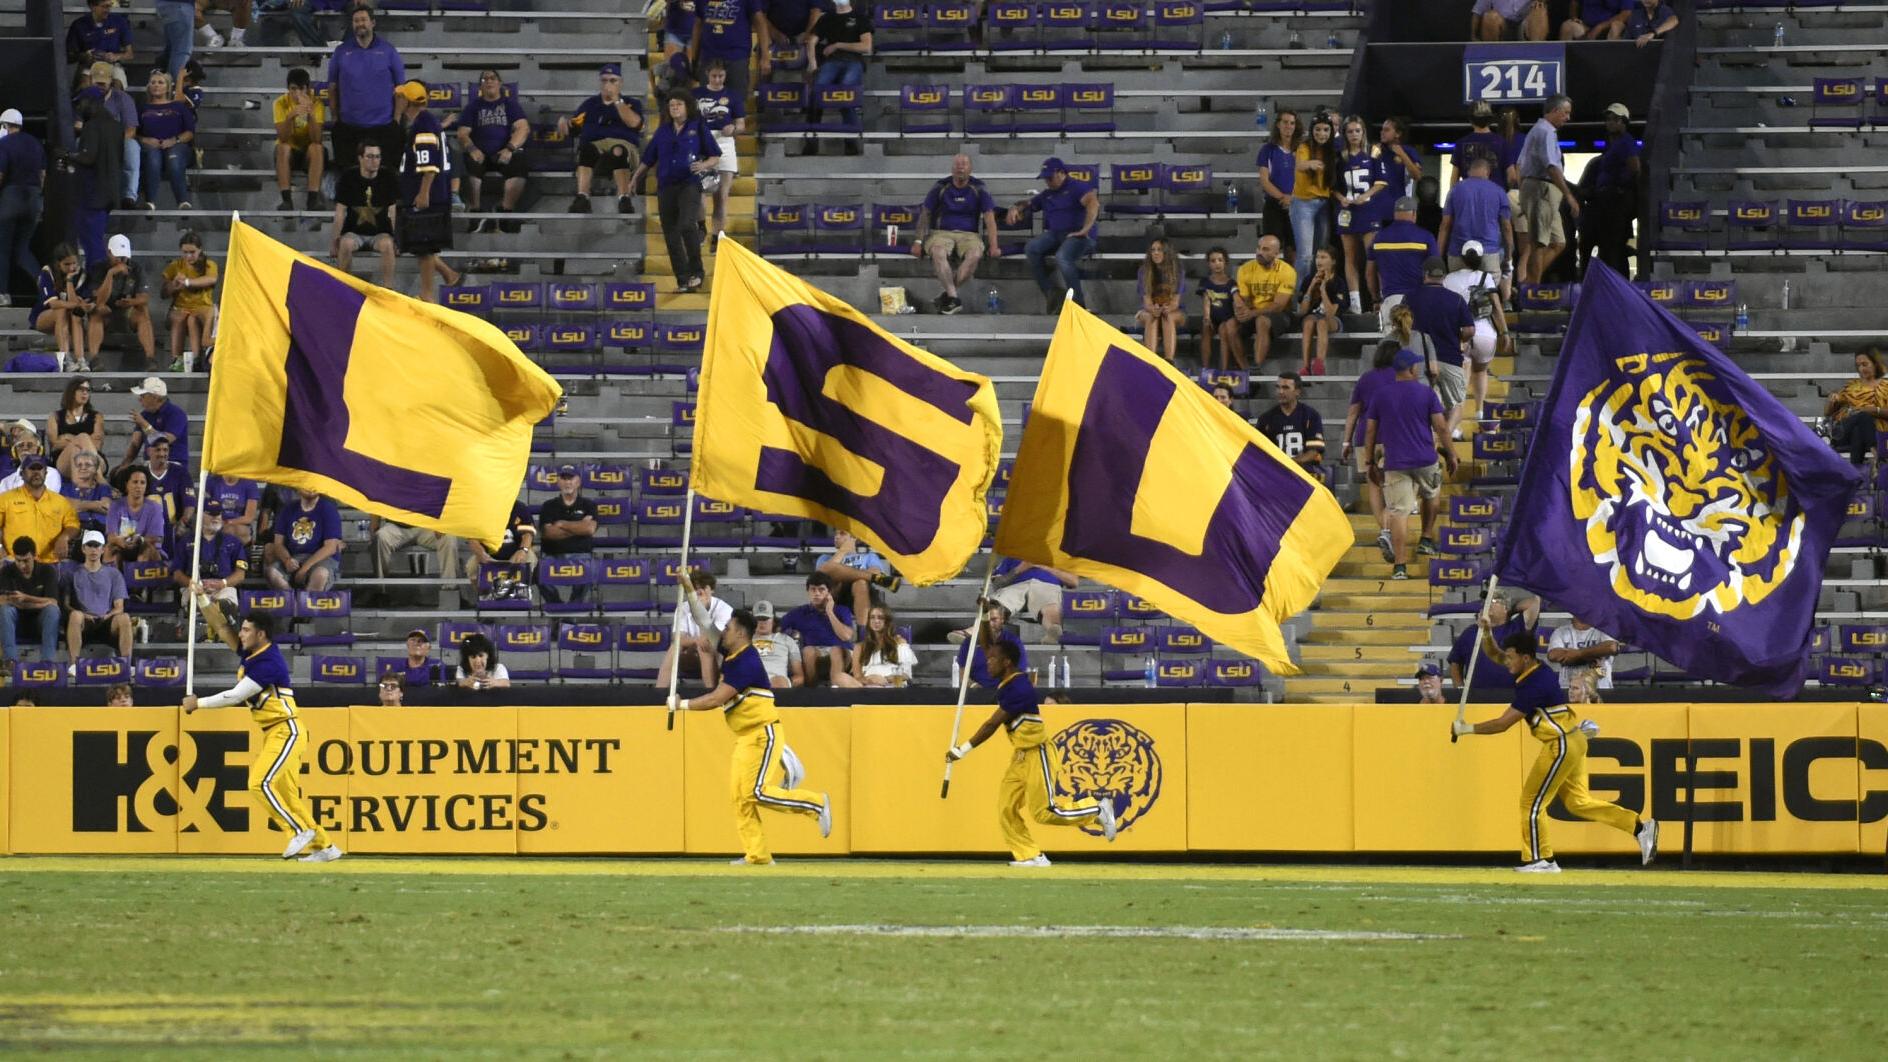 Lsu Football Schedule 2022 Ready For 2022? Lsu Football Schedule Released; See The Tigers' Key Dates,  Opponents | Lsu | Theadvocate.com